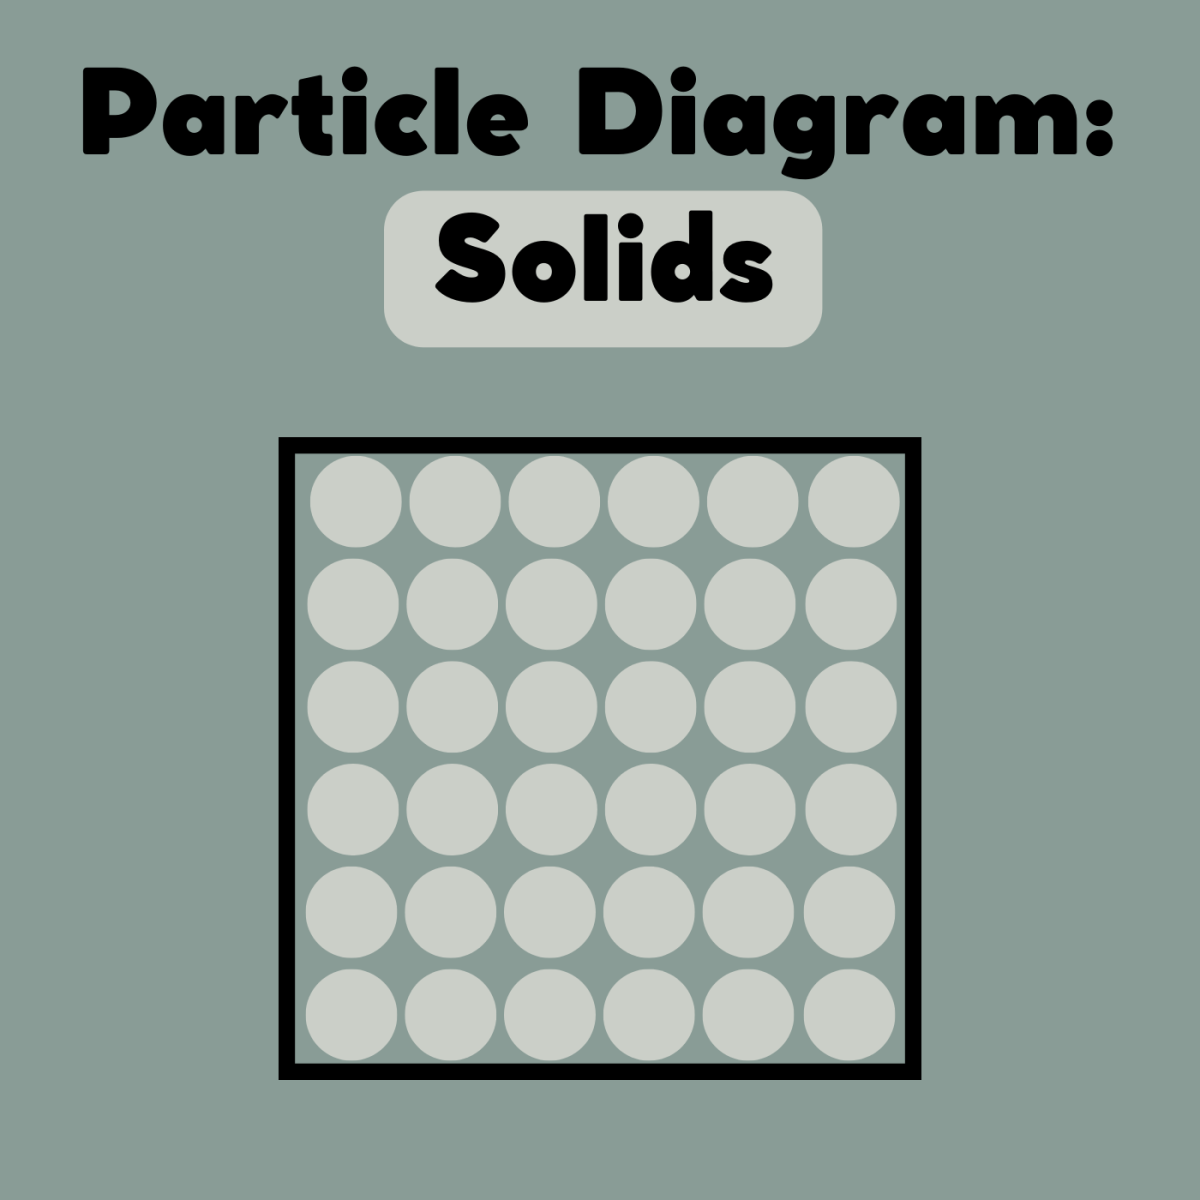 A solid particle diagram. The easiest to draw, just make sure all the particles are the same size and they don't overlap